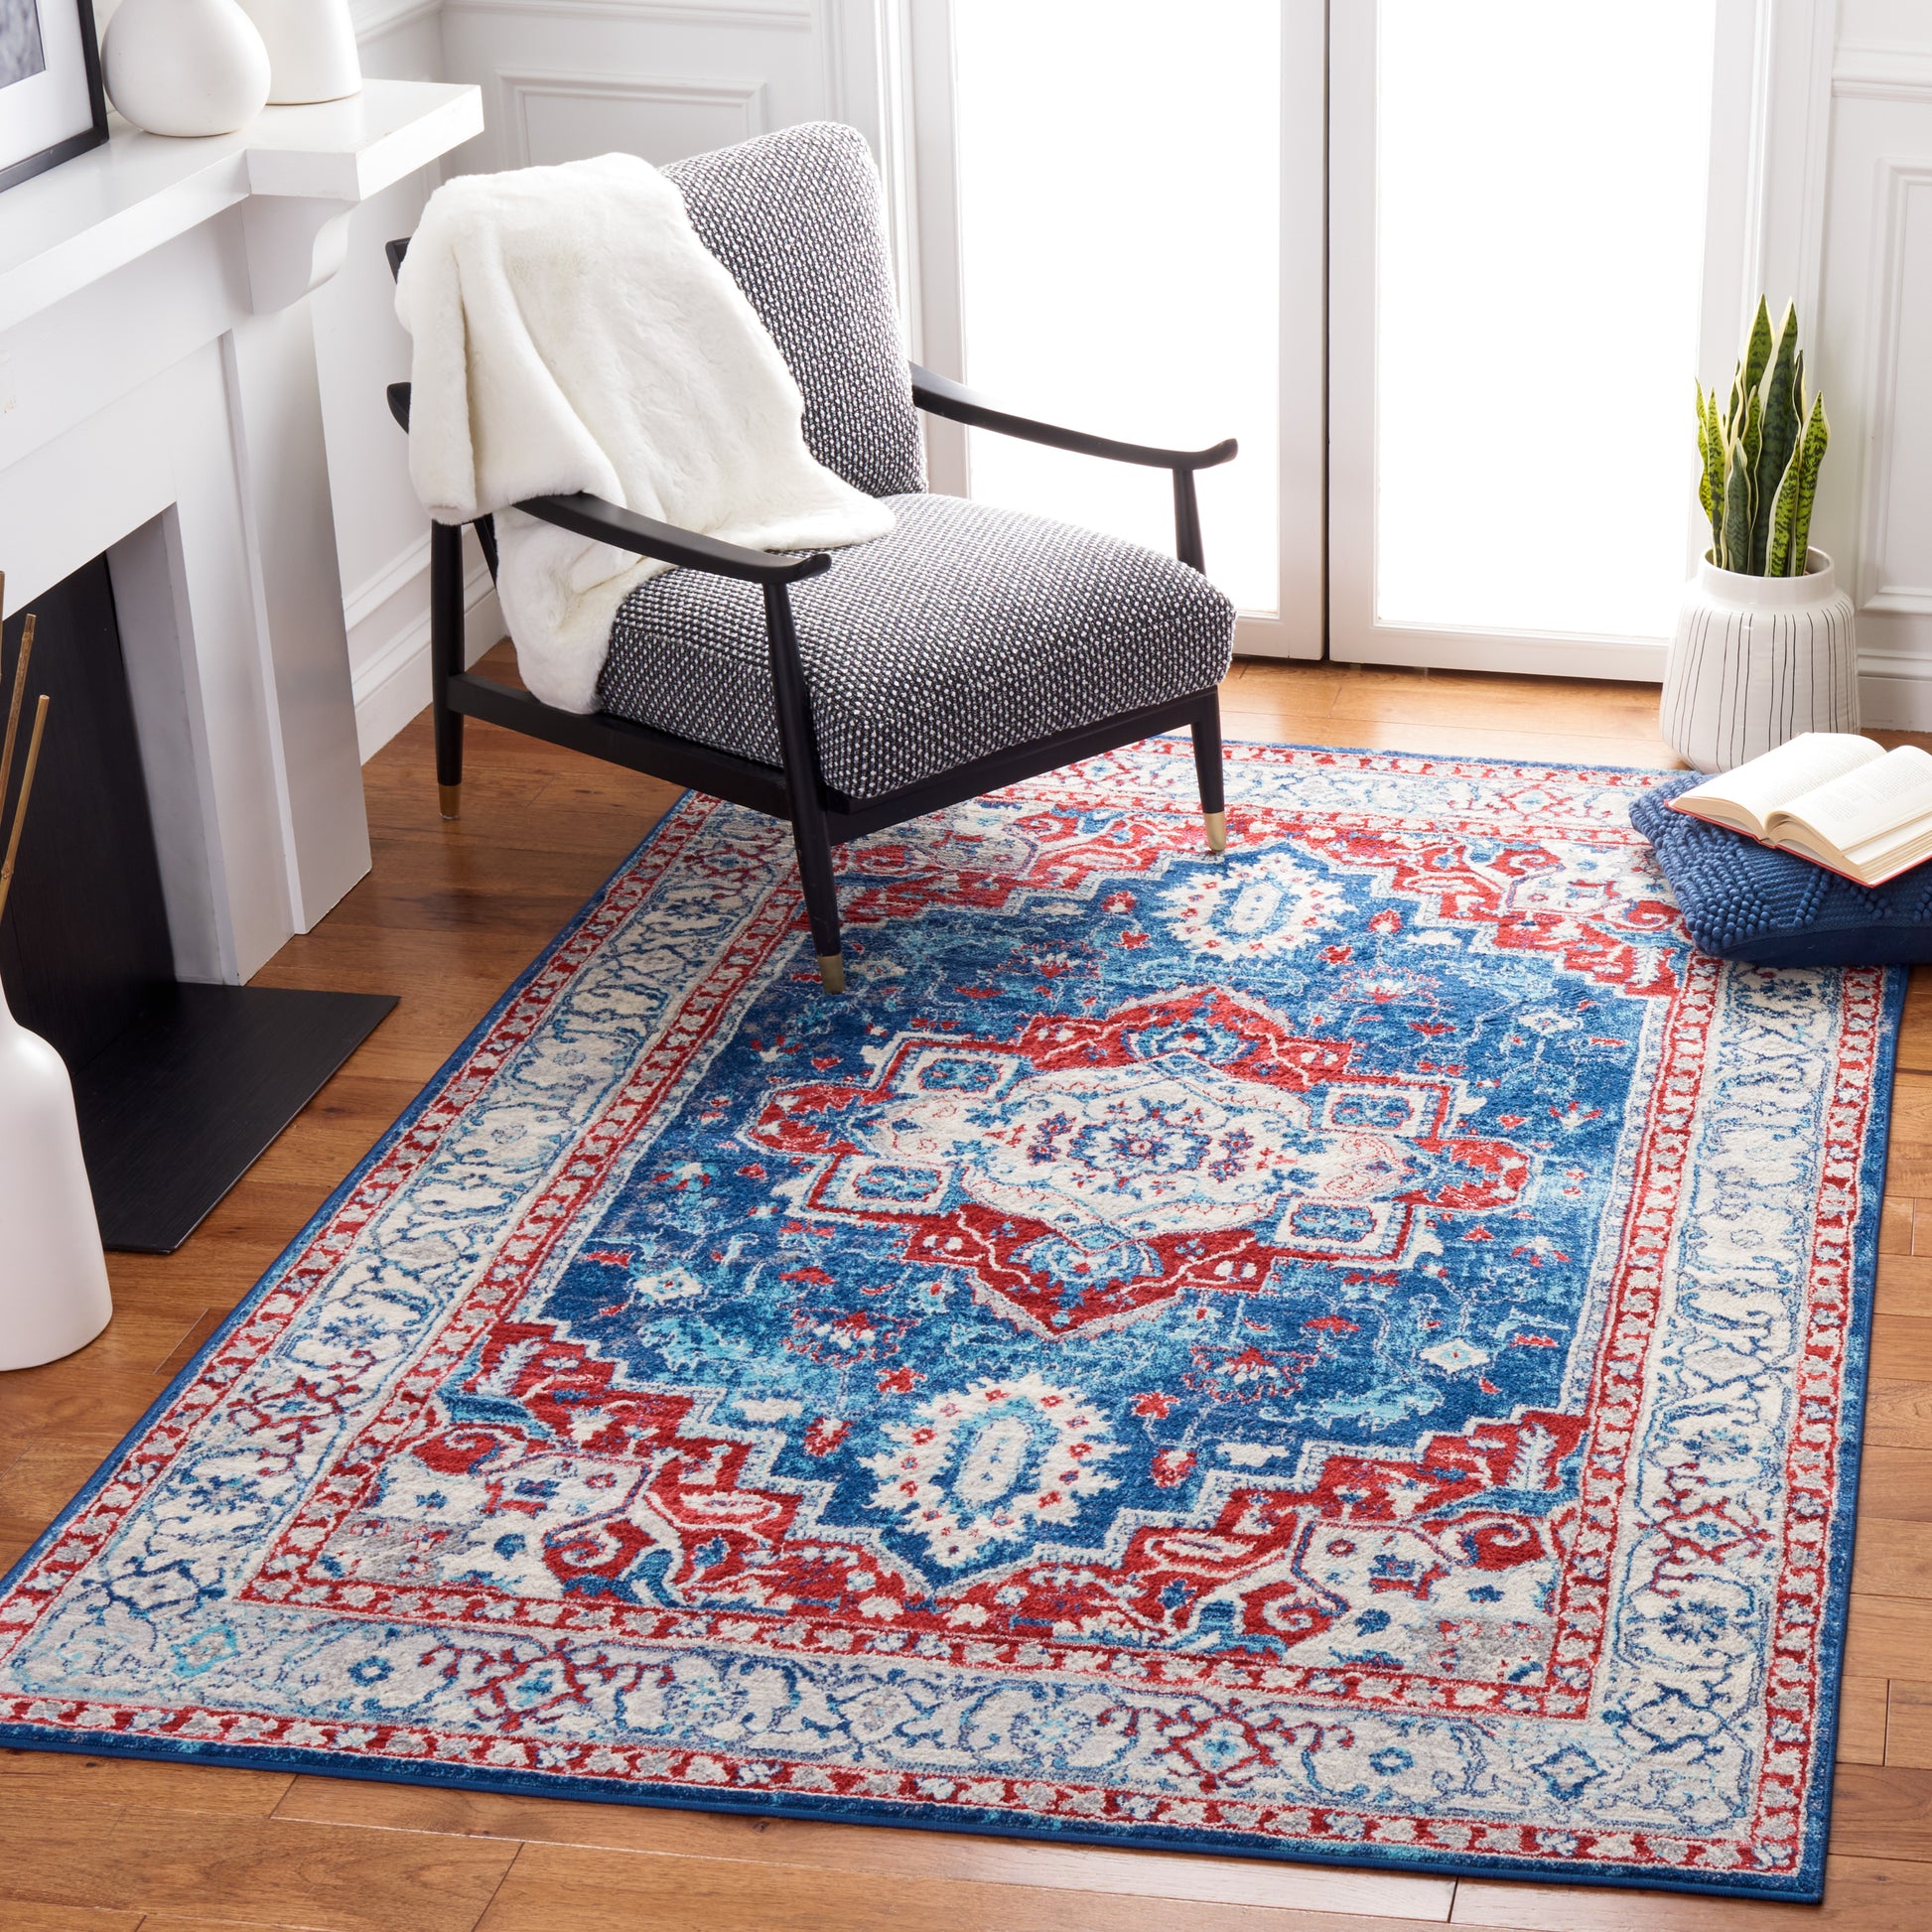 Safavieh Brentwood Bnt851P Navy/Red Area Rug